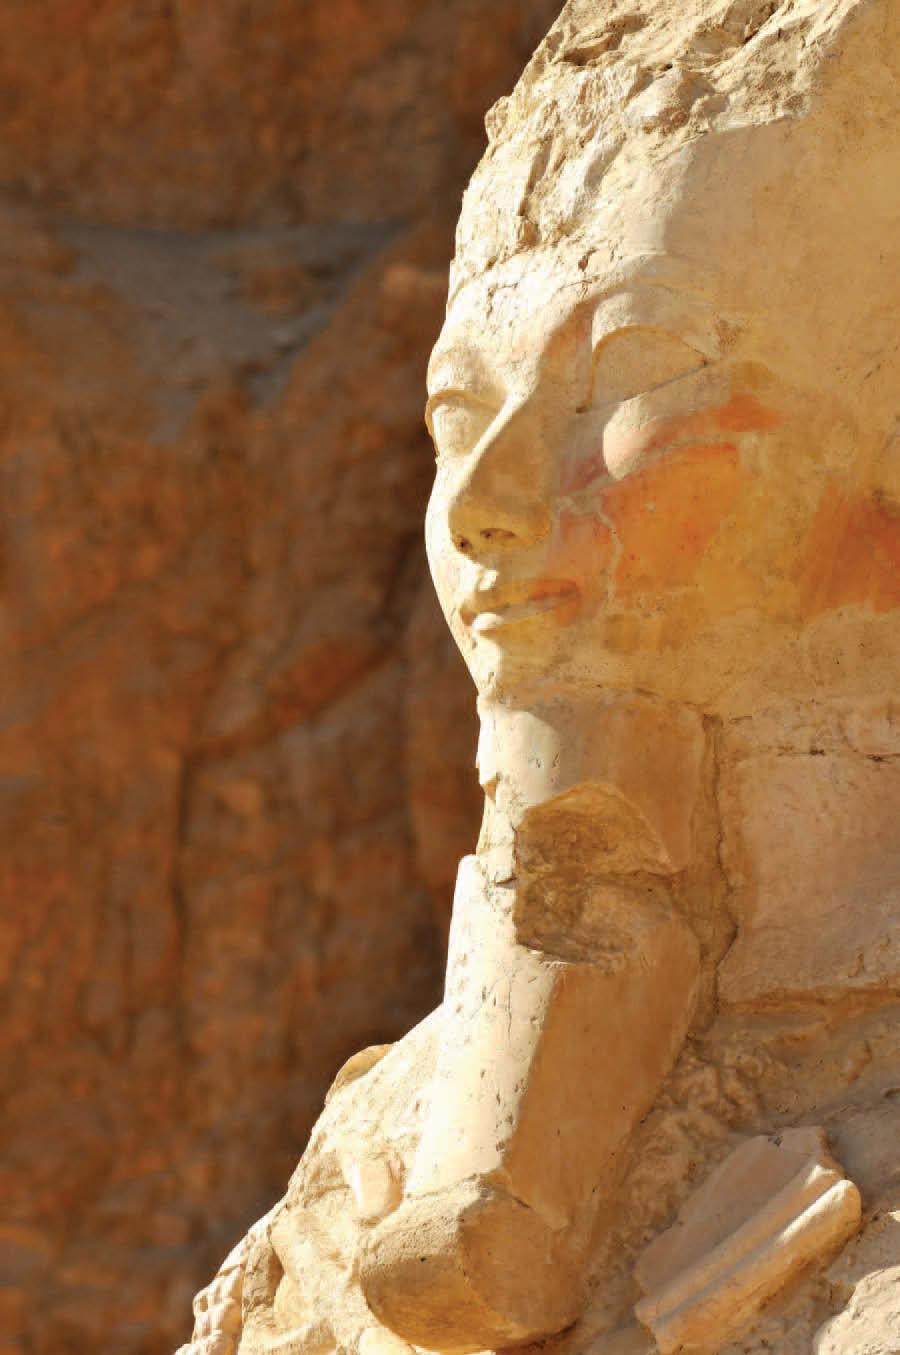 Some years after Hatshepsut's death, her successor, Thutmose III,